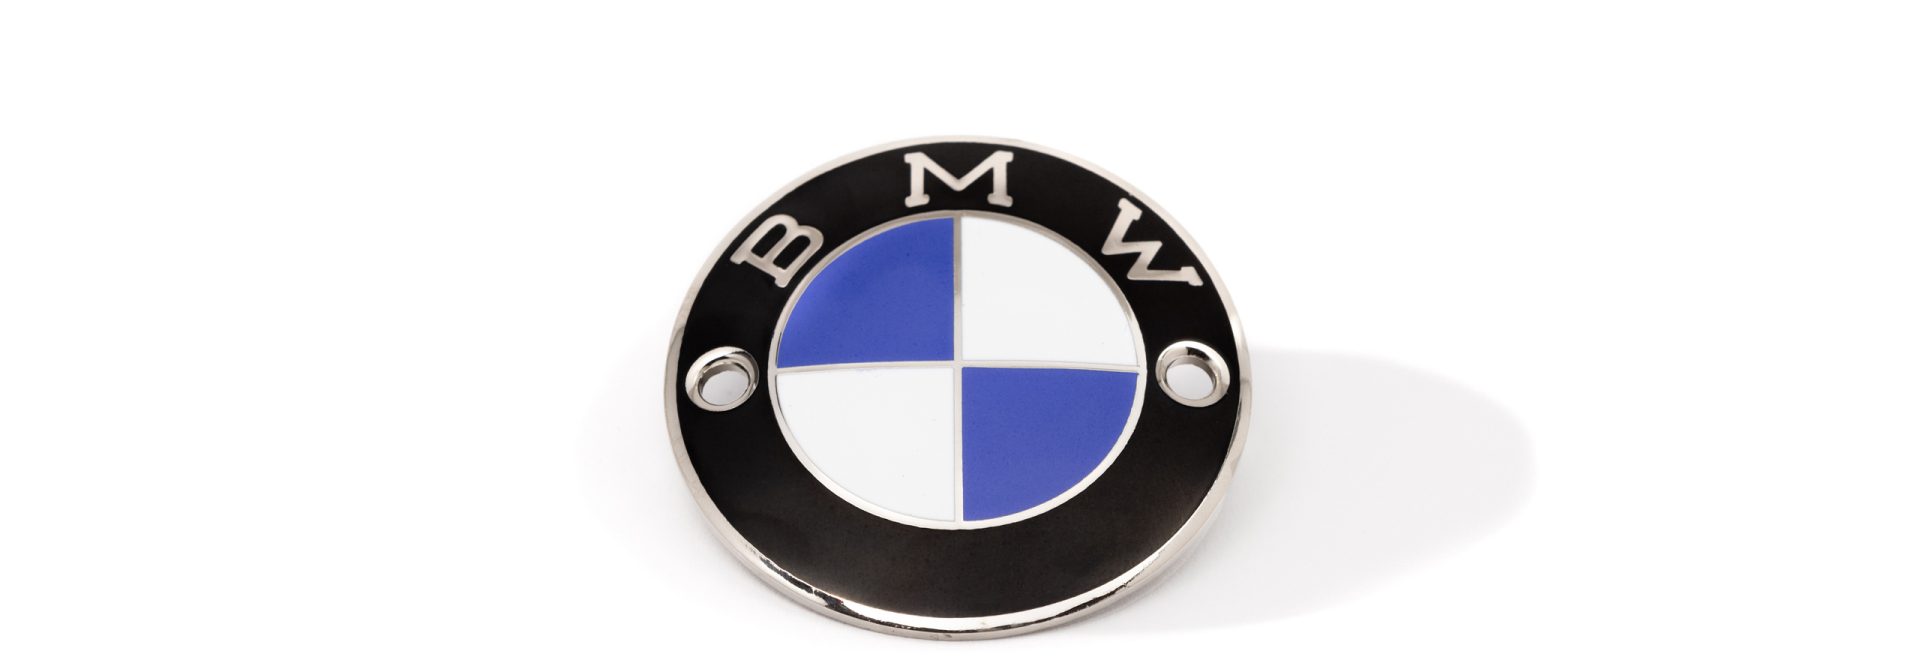 BMW Classic motorcycle reproduction emblem